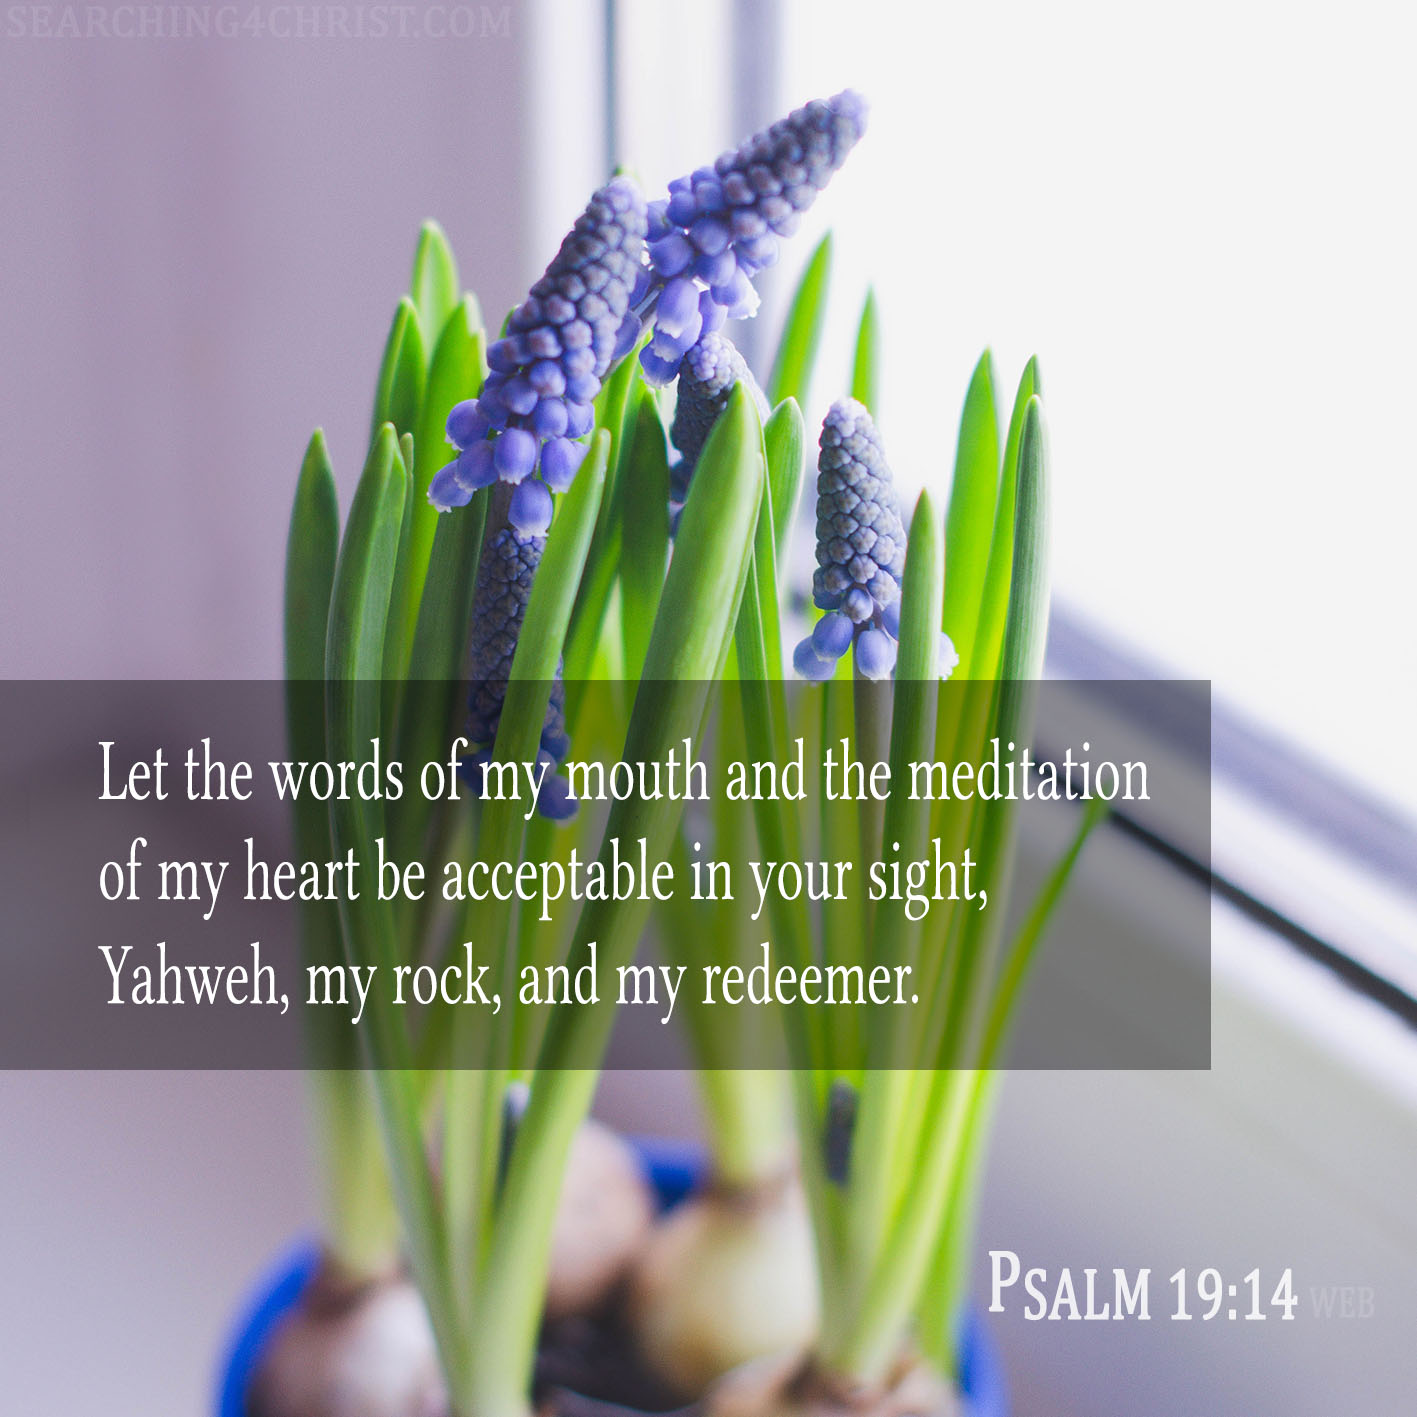 Let the words of my mouth and the meditation of my heart be acceptable in your sight, Yahweh, my rock, and my redeemer. Psalm 19:14